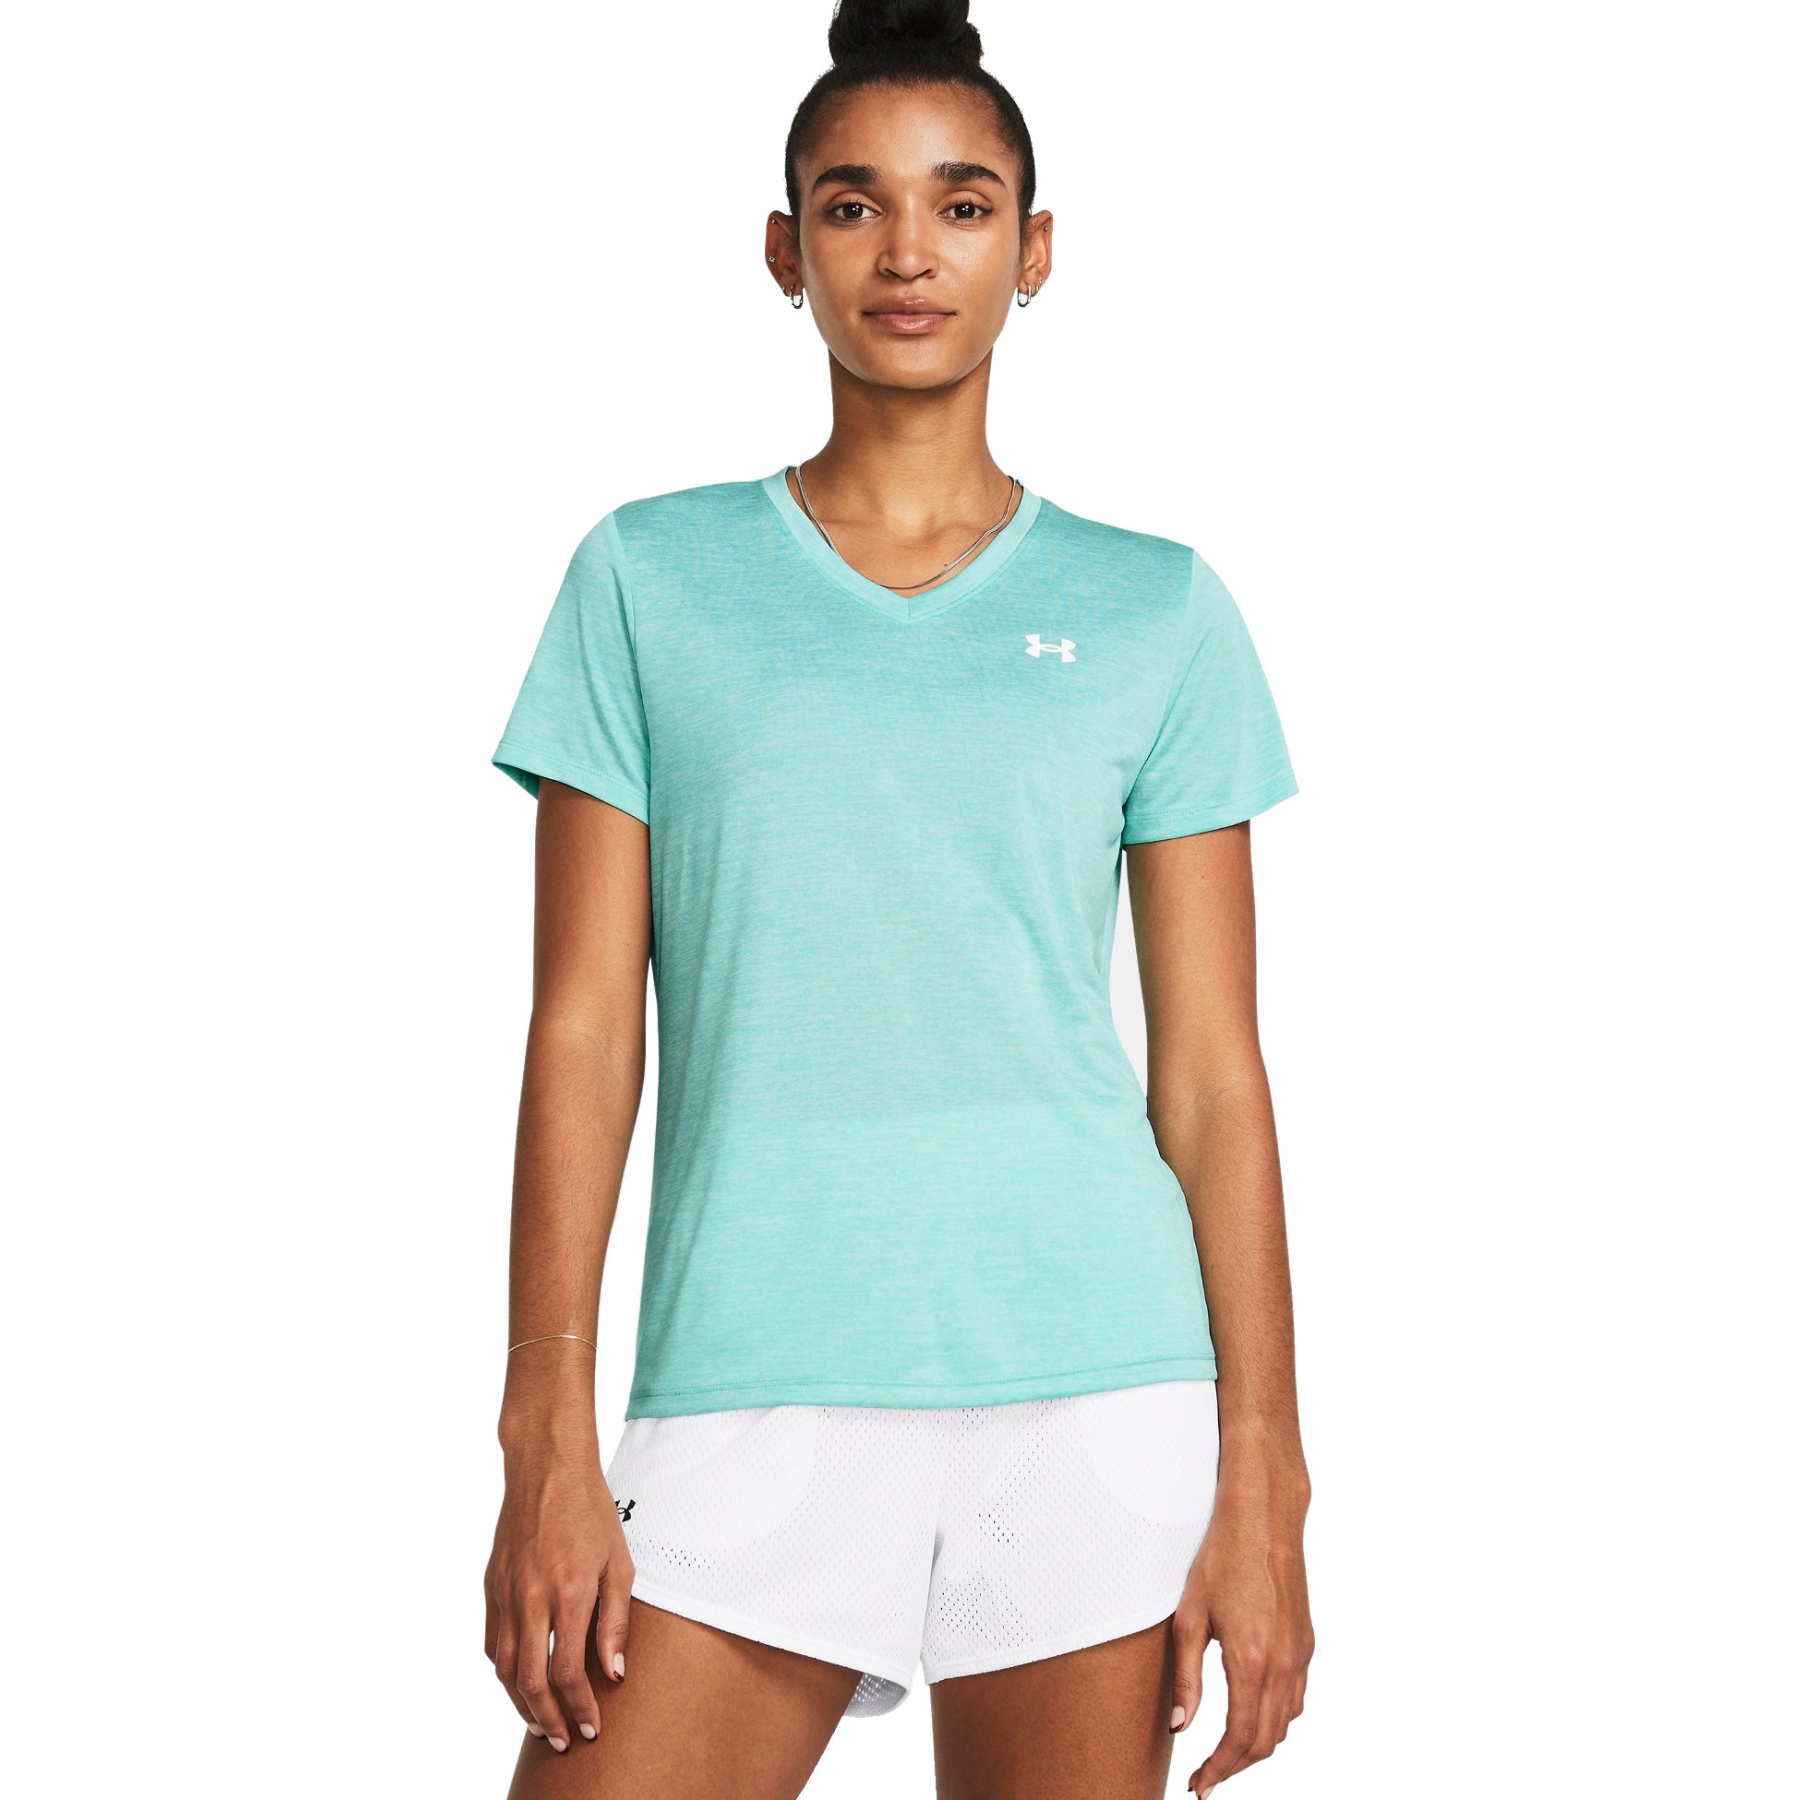 Picture of Under Armour UA Tech™ Twist V-Neck Short Sleeve Shirt Women - Radial Turquoise/White/White